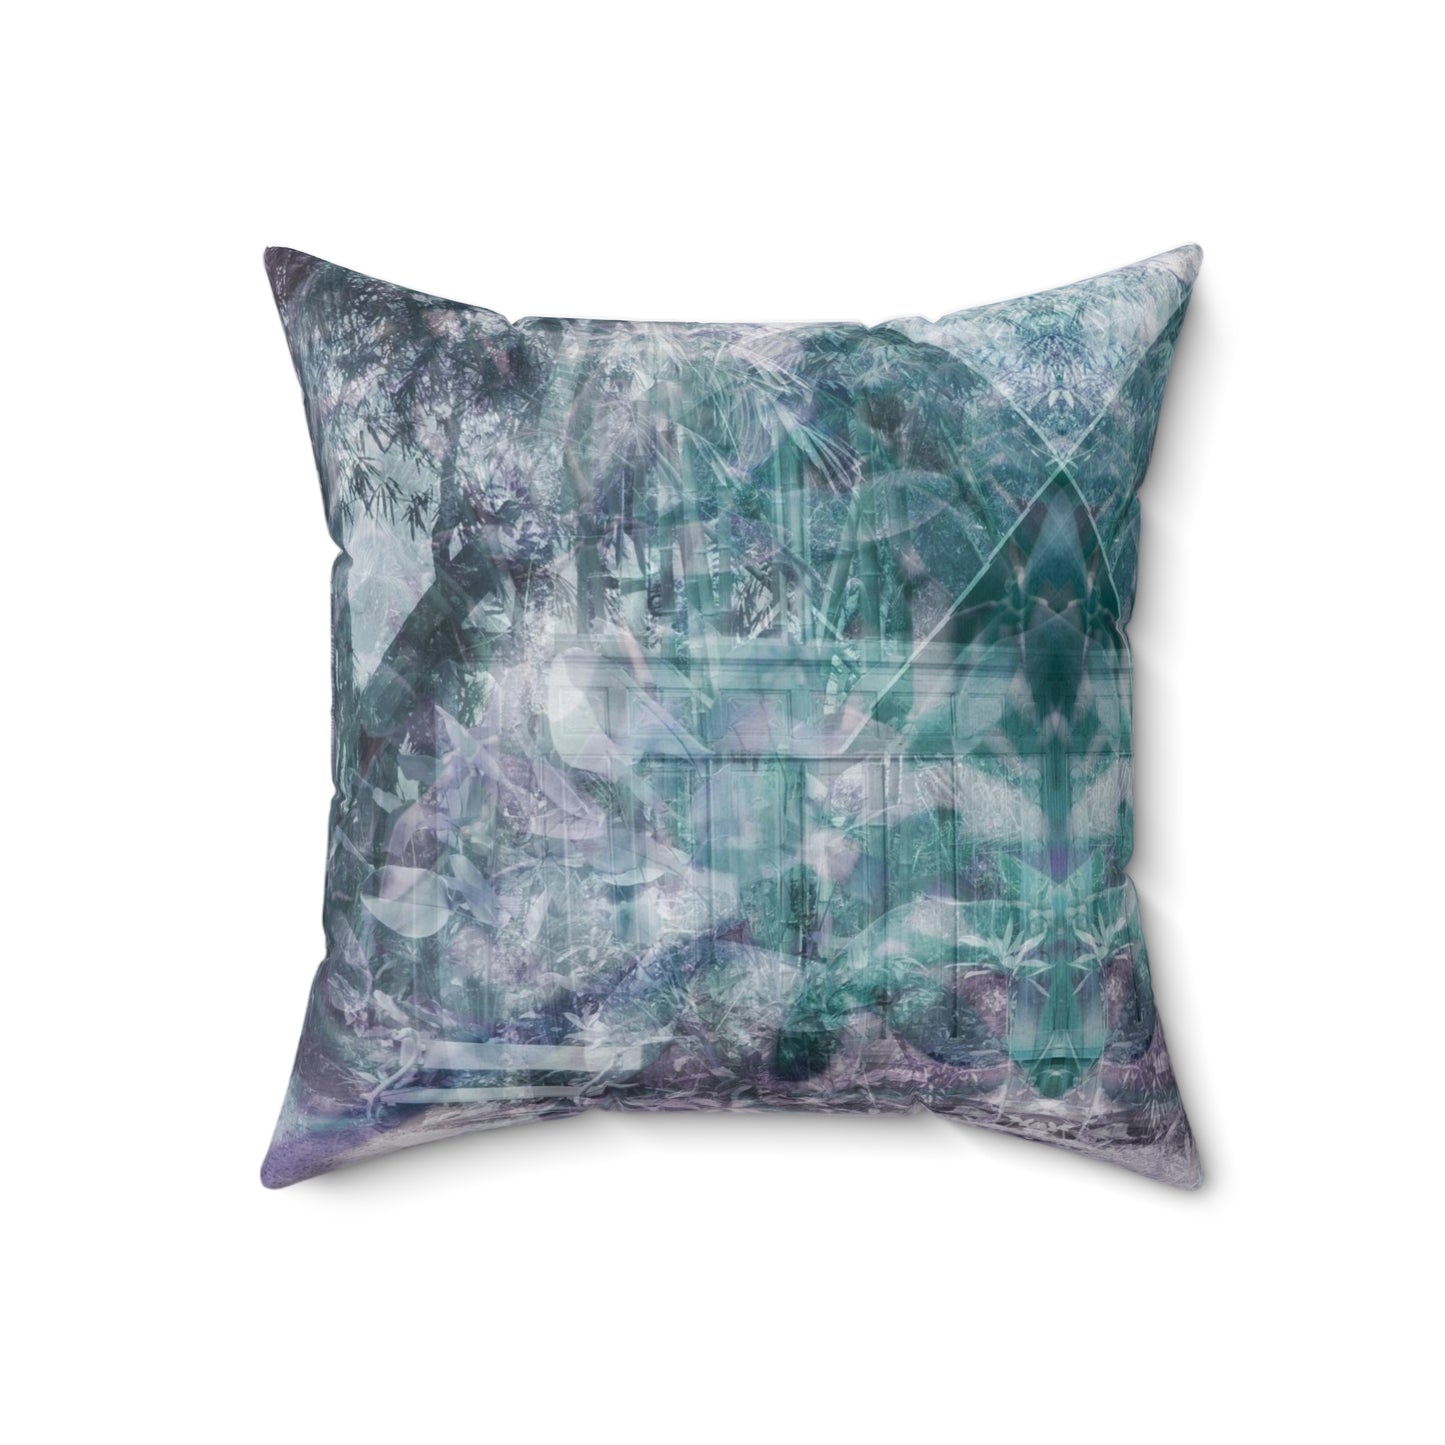 Crystal Visions Double Sided Mantra Pillow